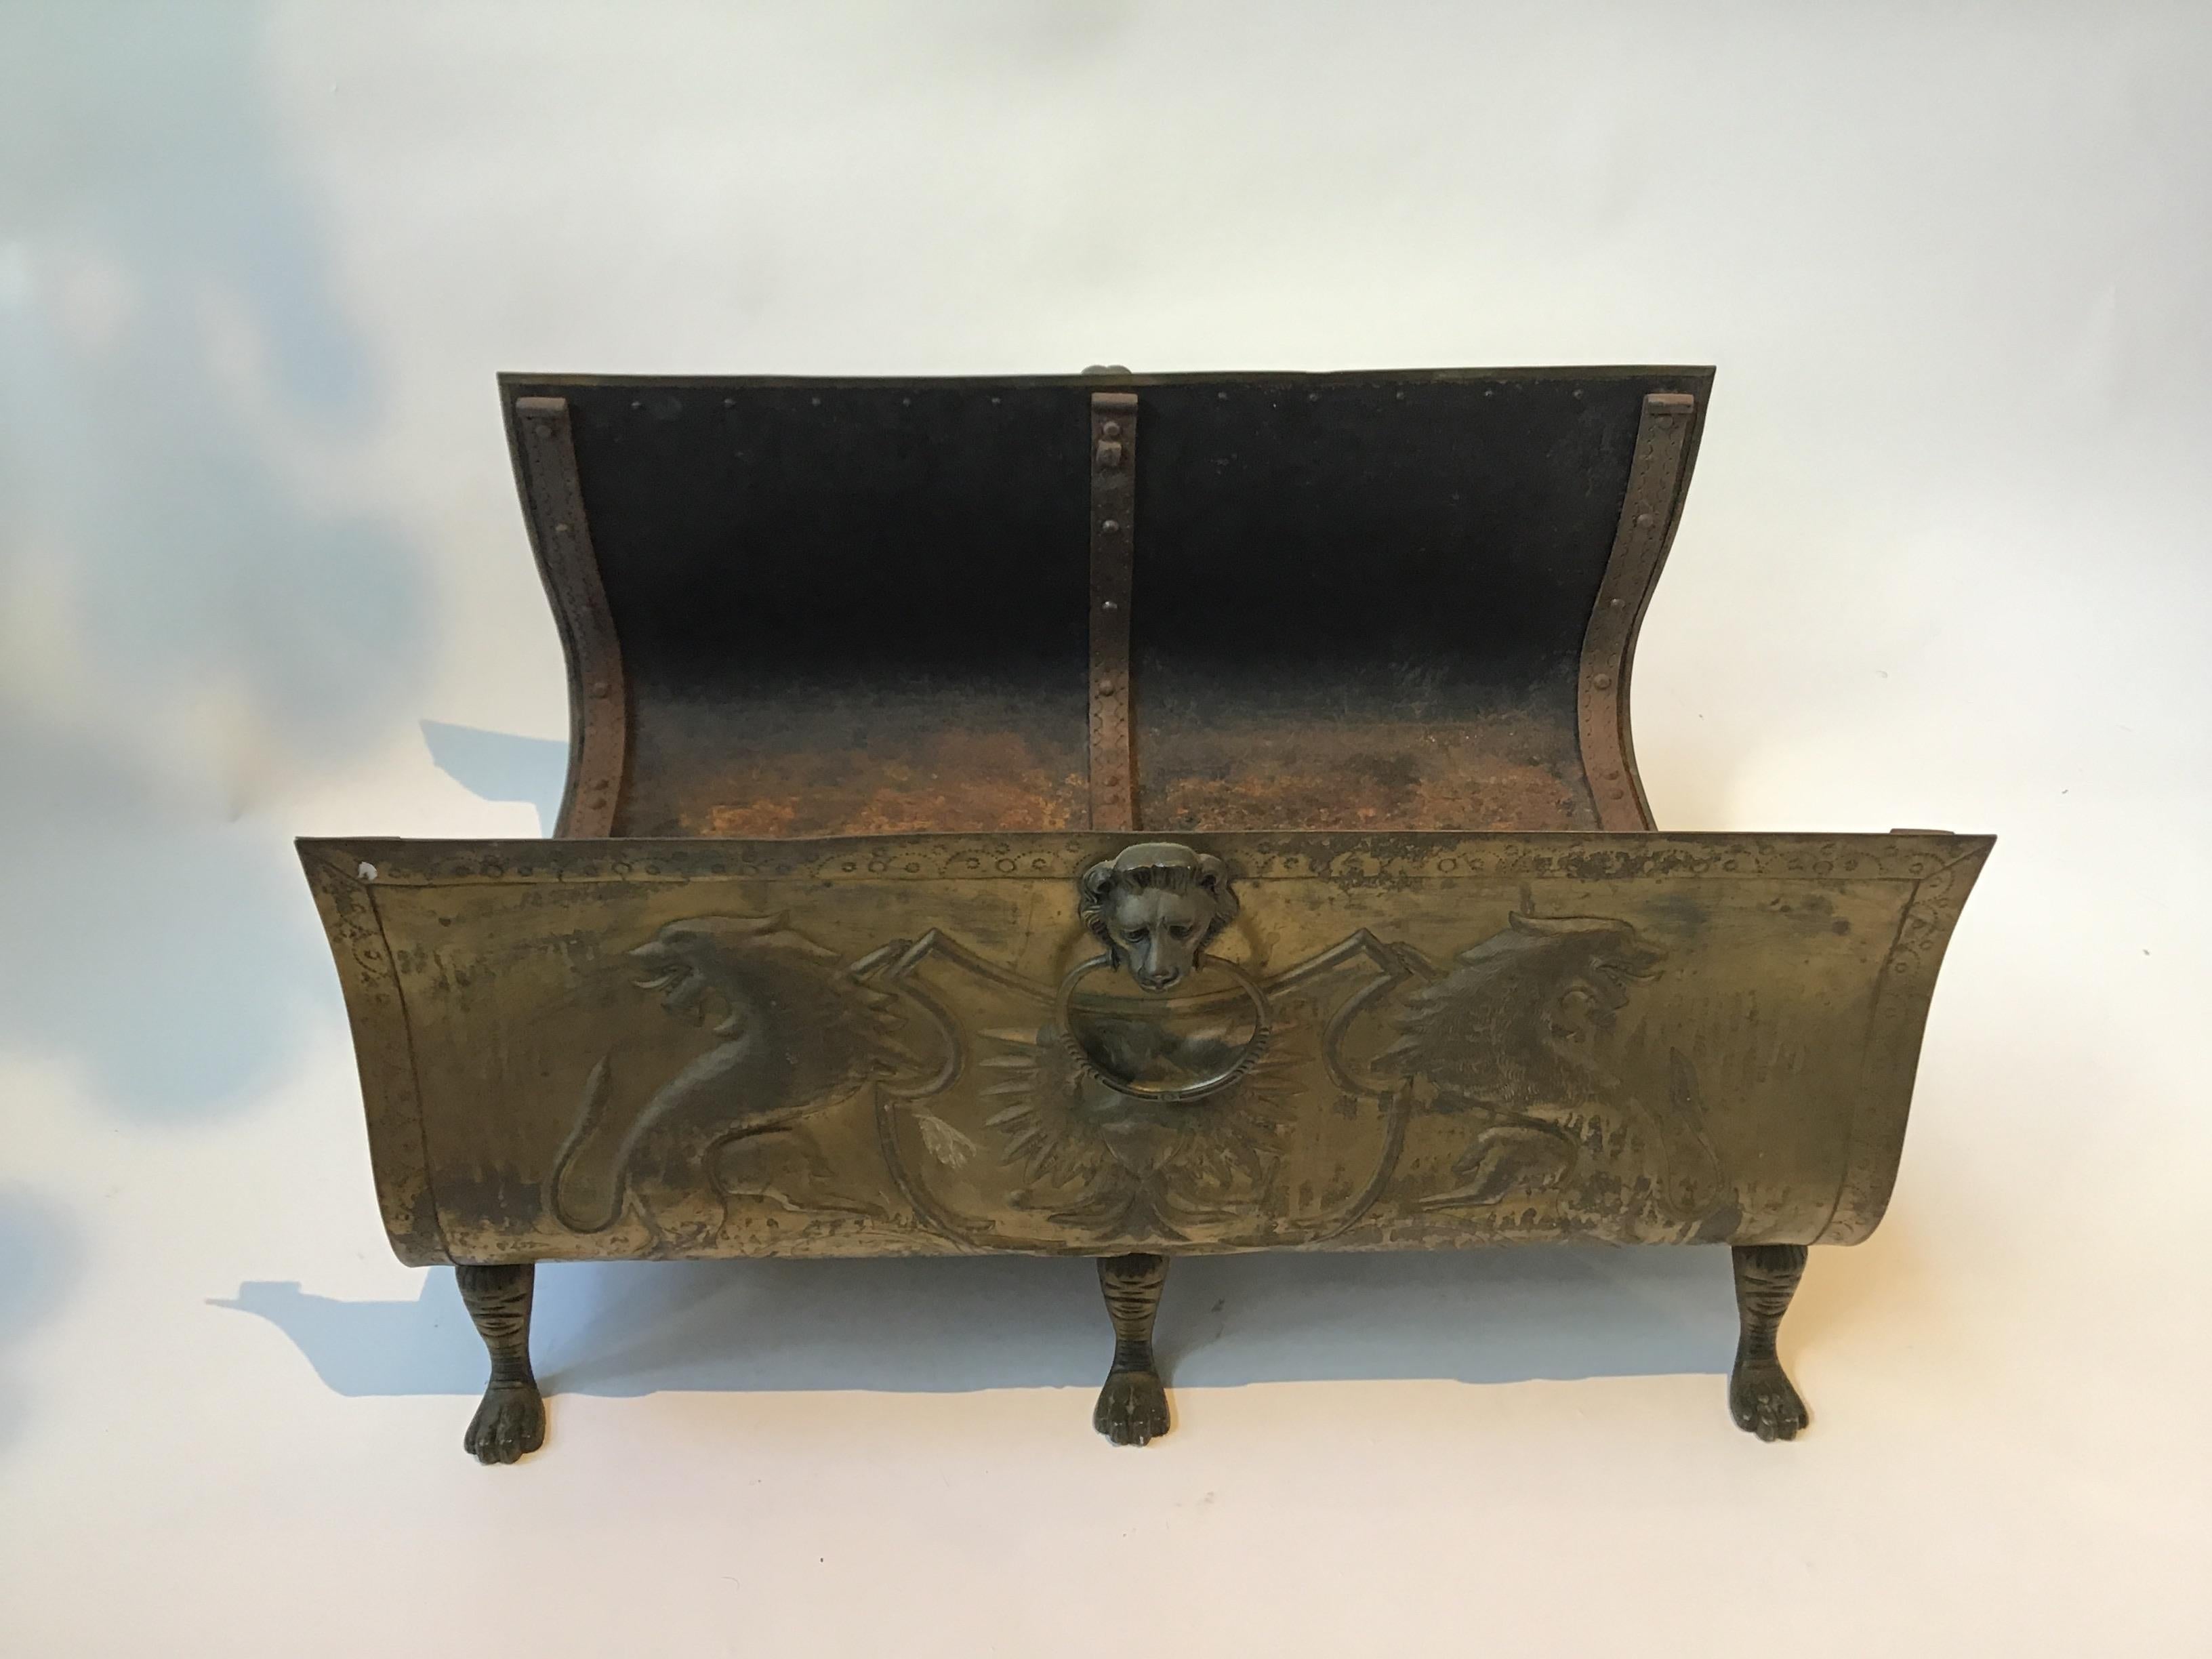 1870s English brass large log holder. Purchased from a Southampton, NY oceanfront estate.